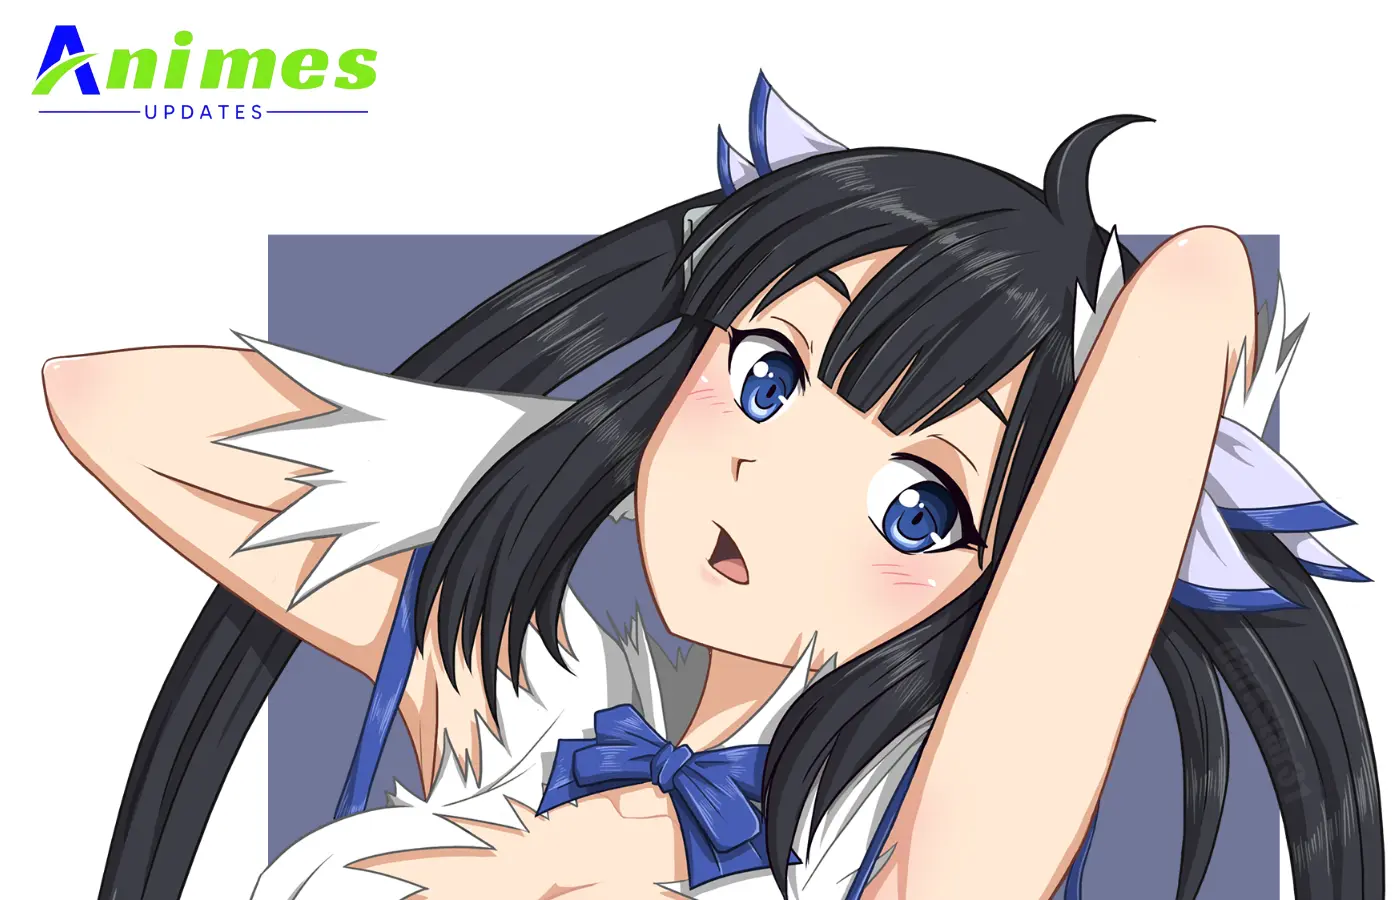 Hestia from Is It Wrong to Try to Pick Up Girls in a Dungeon